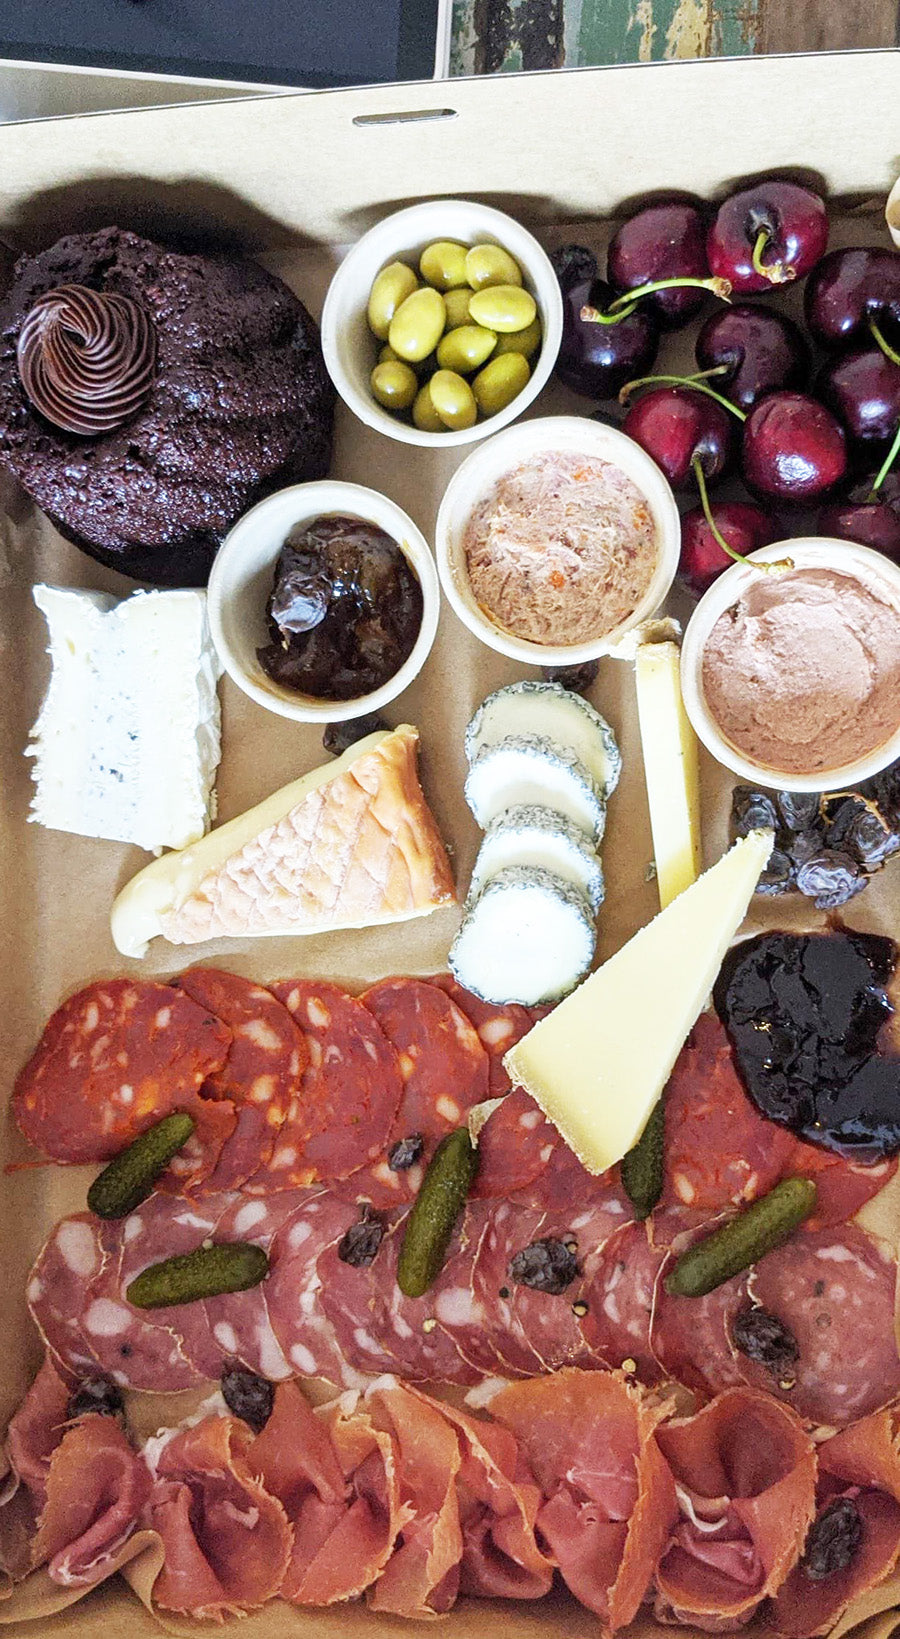 New Year's Day Box - La Boite A Fromages